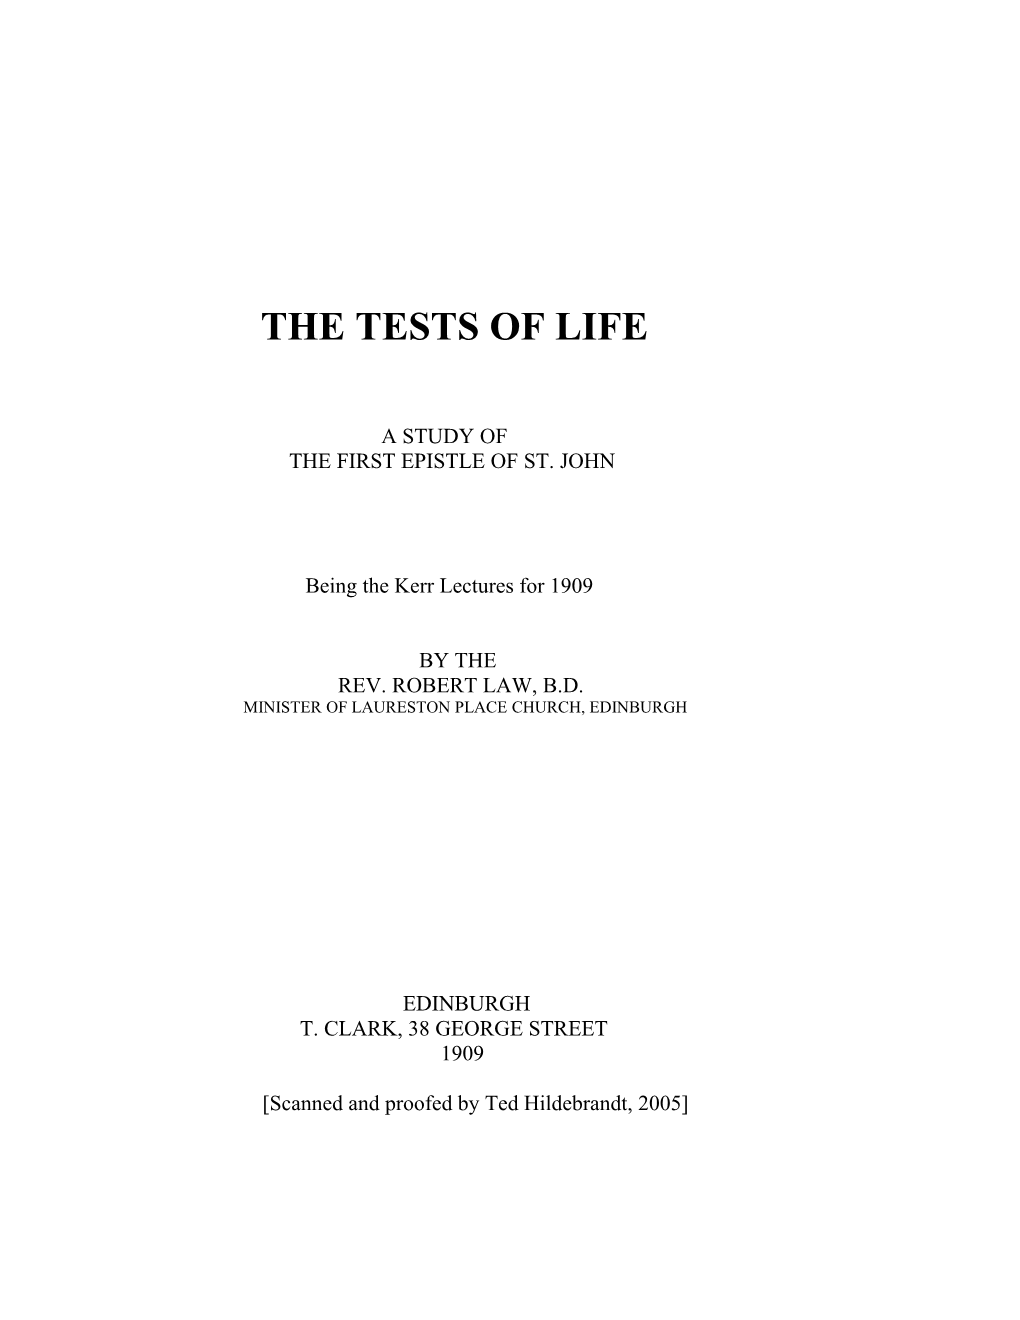 THE TESTS of LIFE: a Study of the First Epistle of St. John